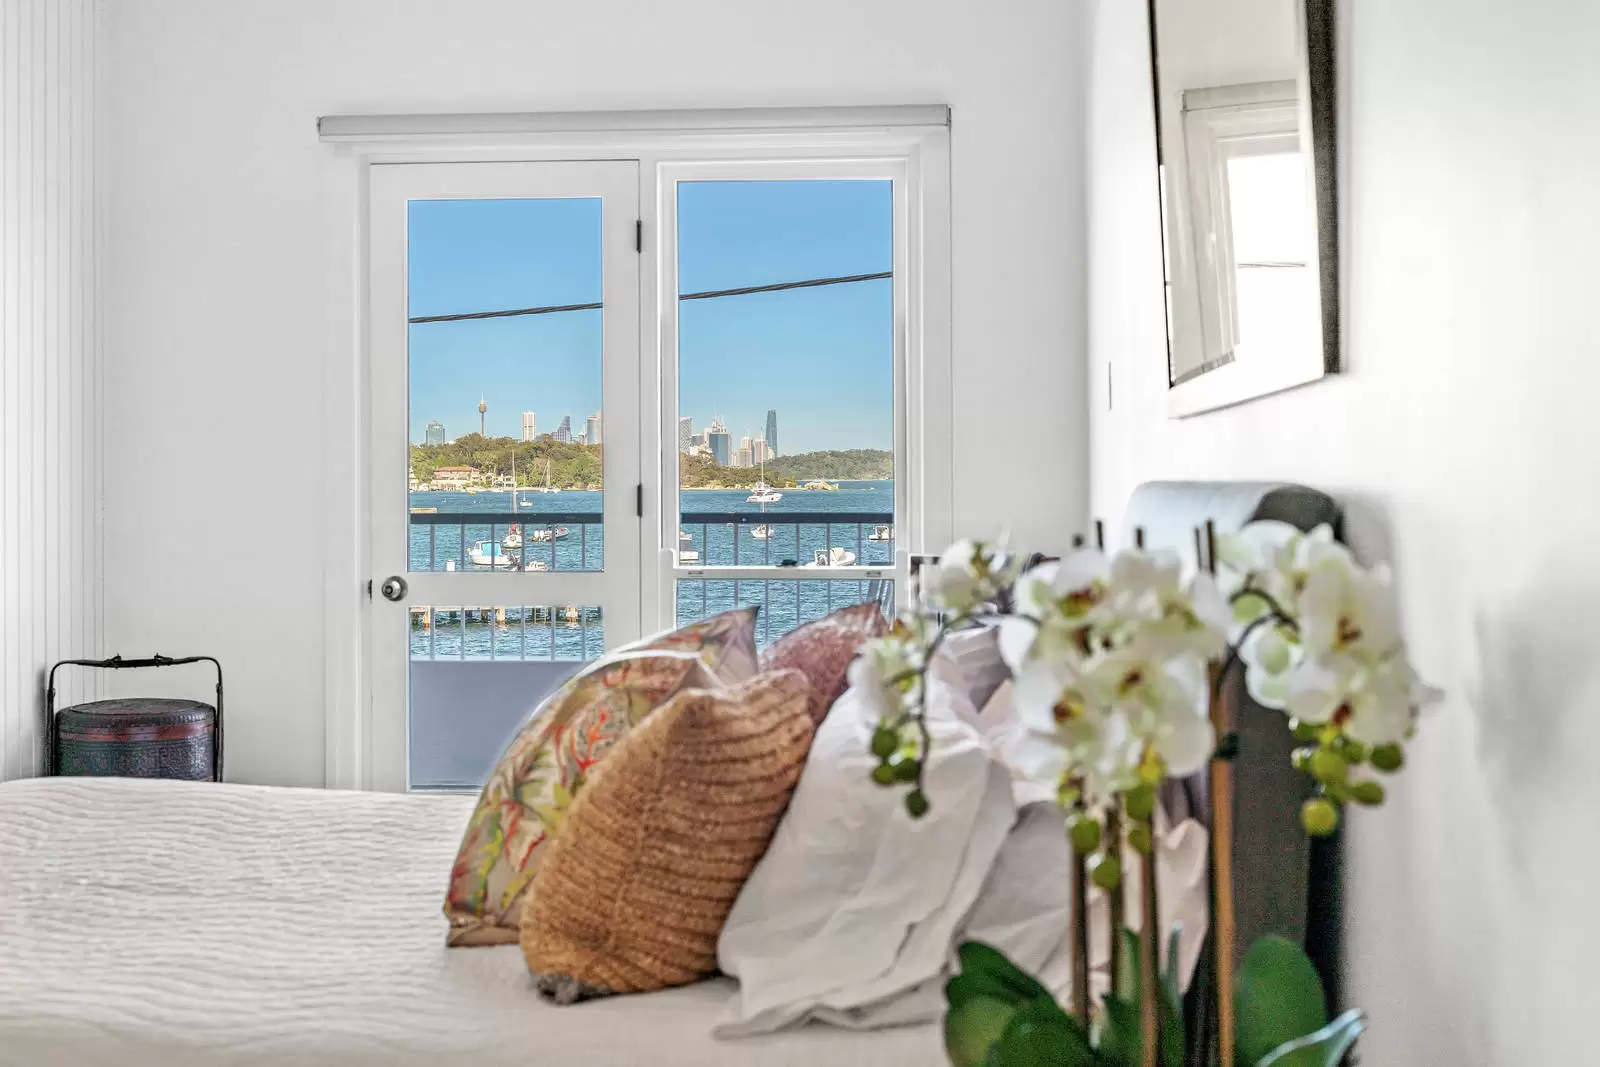 Photo #16: 5 Marine Parade, Watsons Bay - For Lease by Sydney Sotheby's International Realty